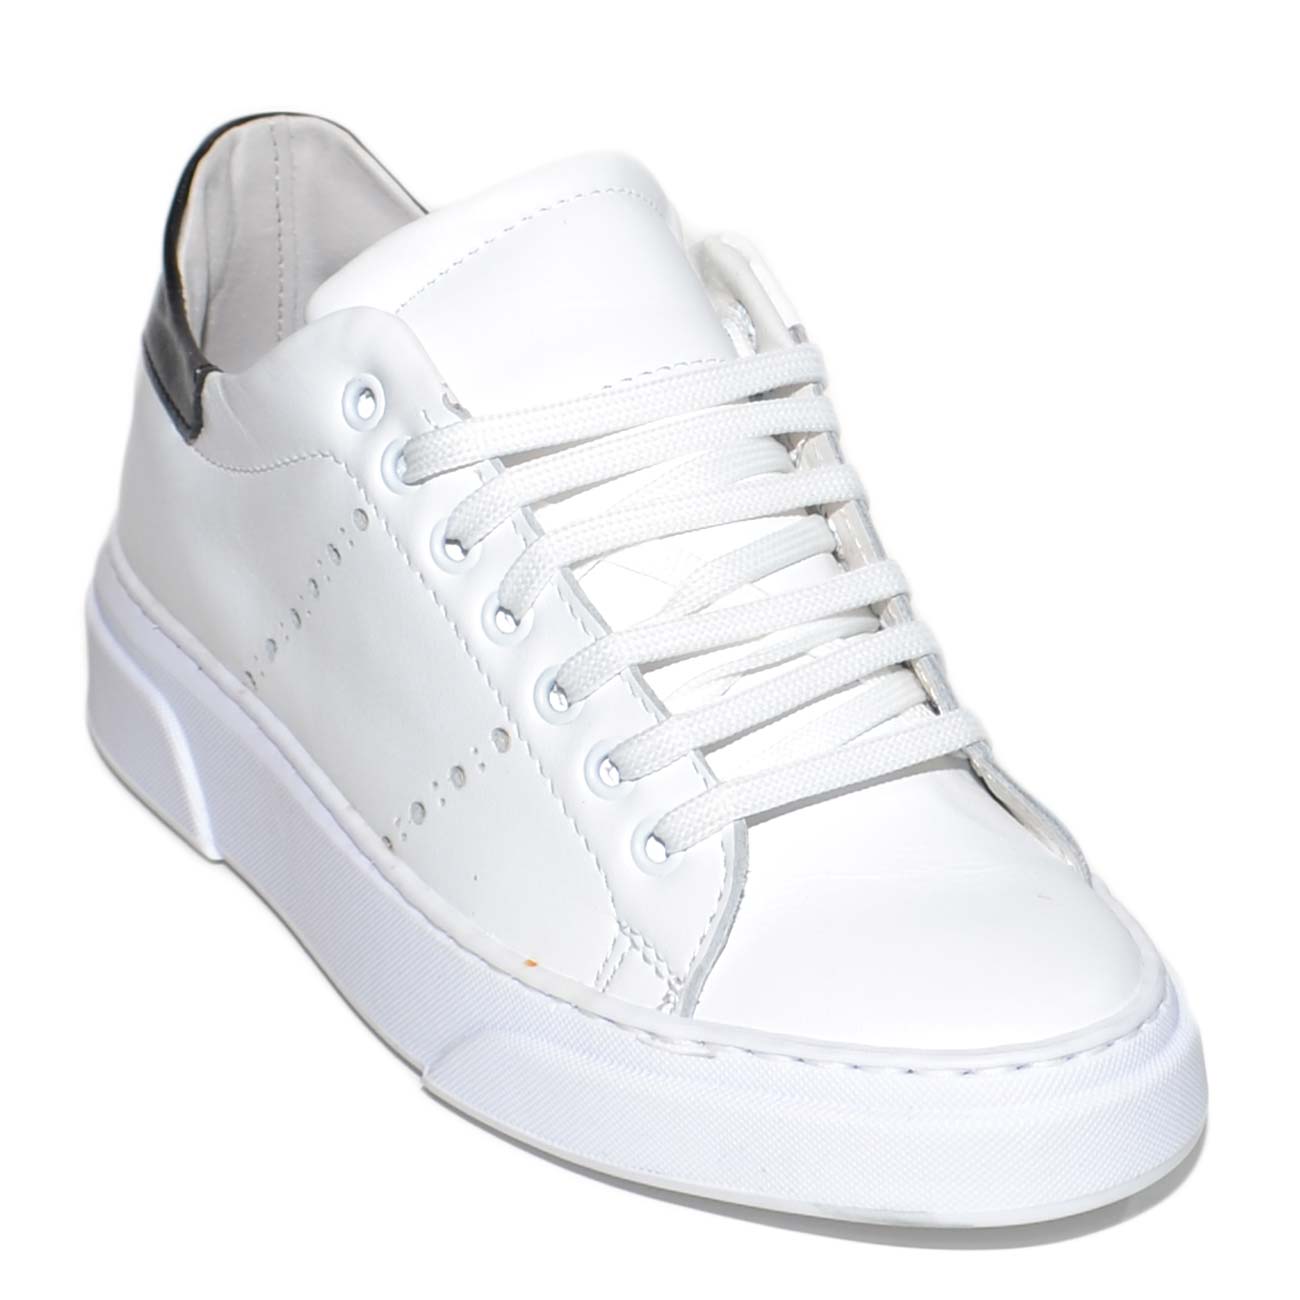 sneakers pelle bianche